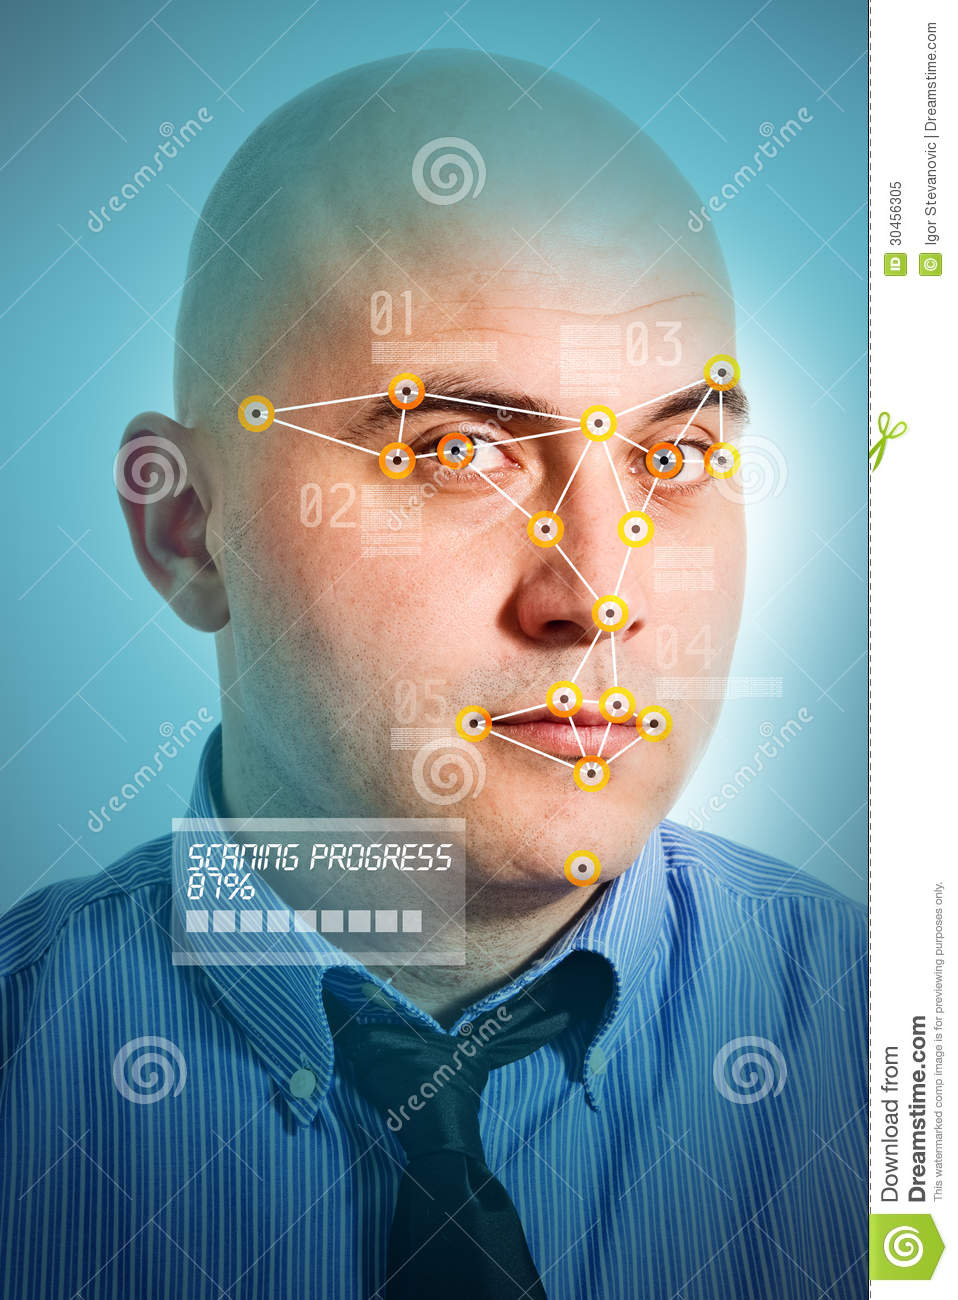 Face recognition software for mac free